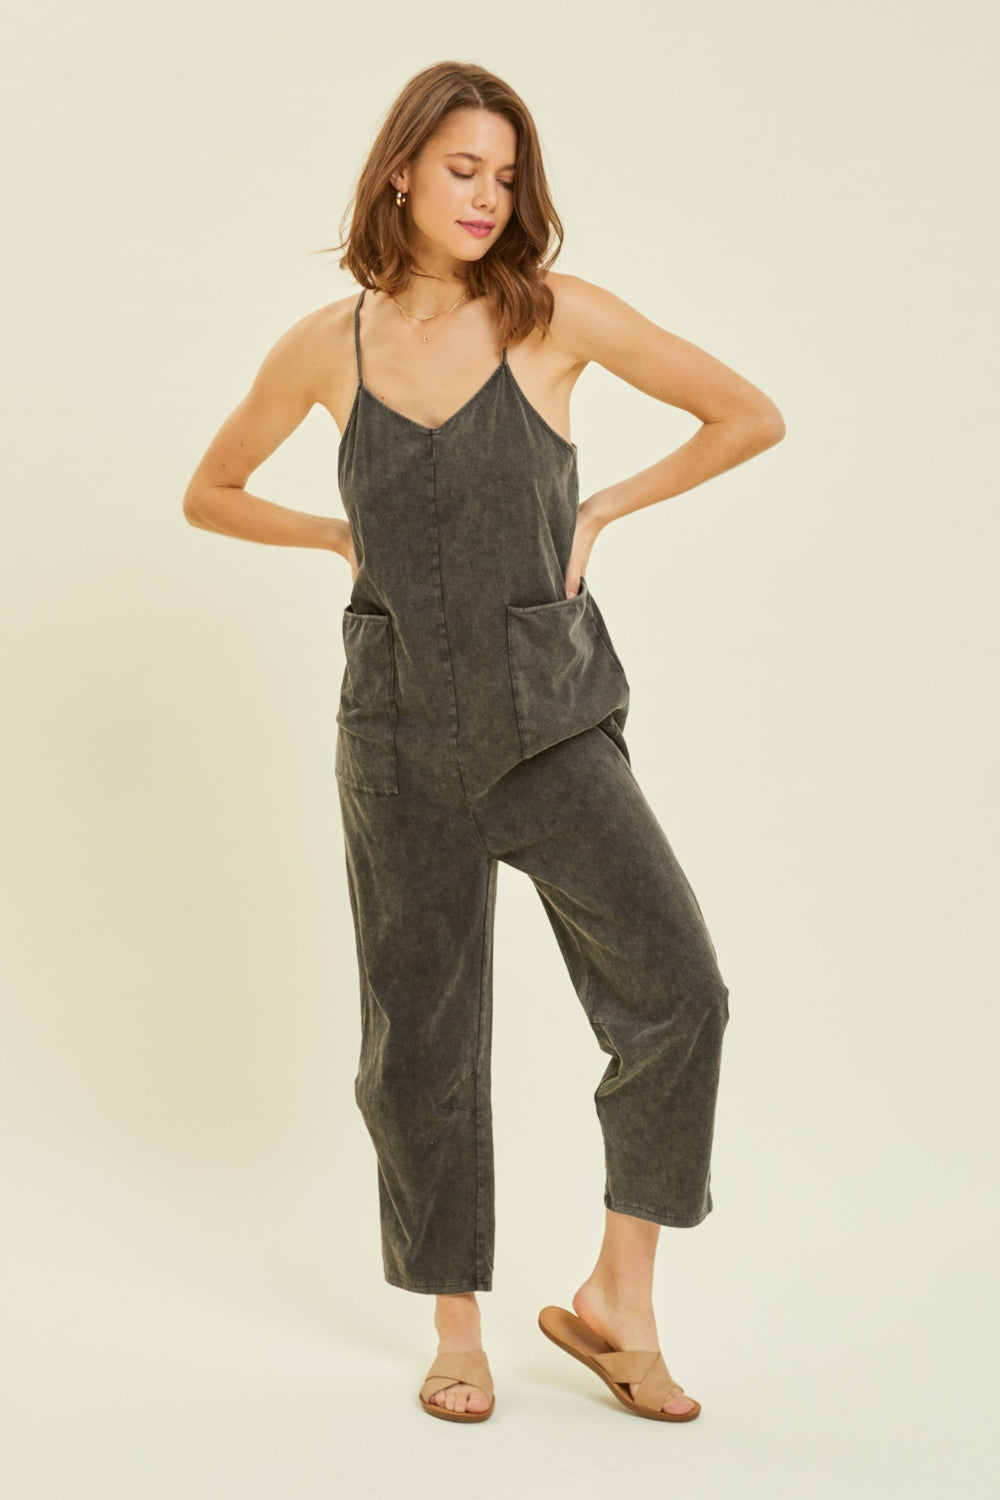 HEYSON Full Size Mineral-Washed-Oversized Jumpsuit with Pockets - Ultimate Blend of Comfort and Style